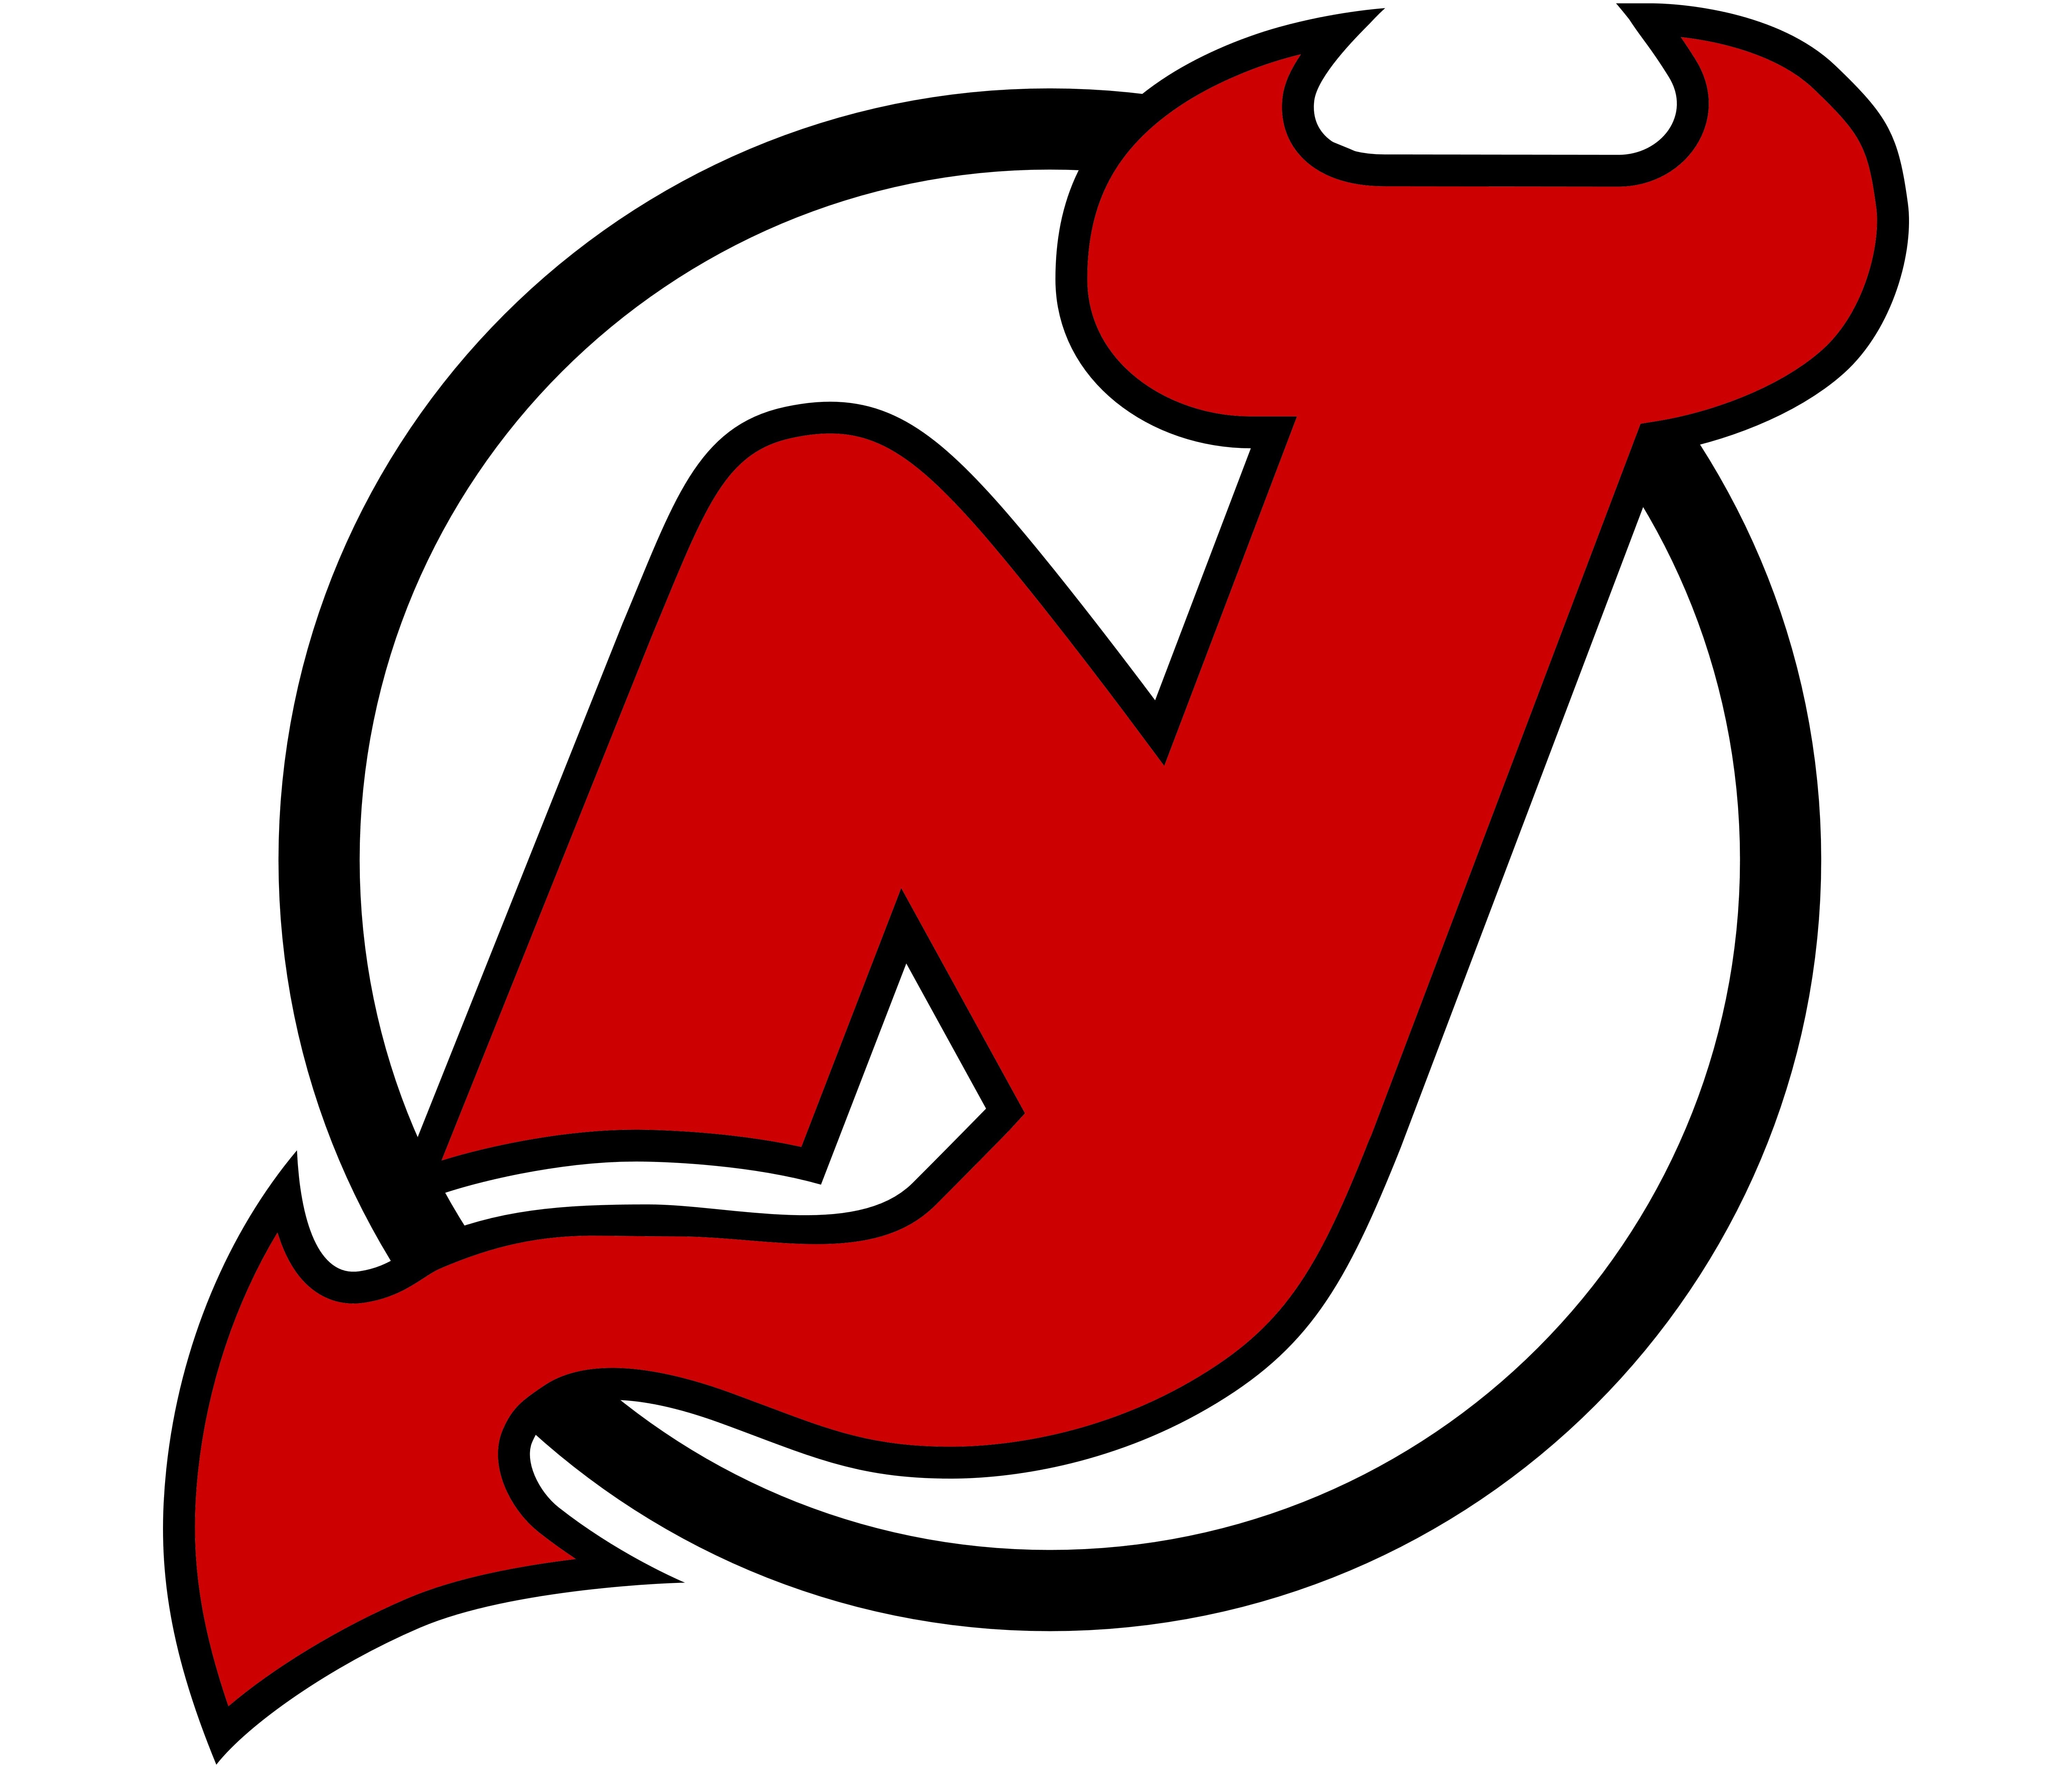 Quick mock of the new alternate with a standard logo : r/devils